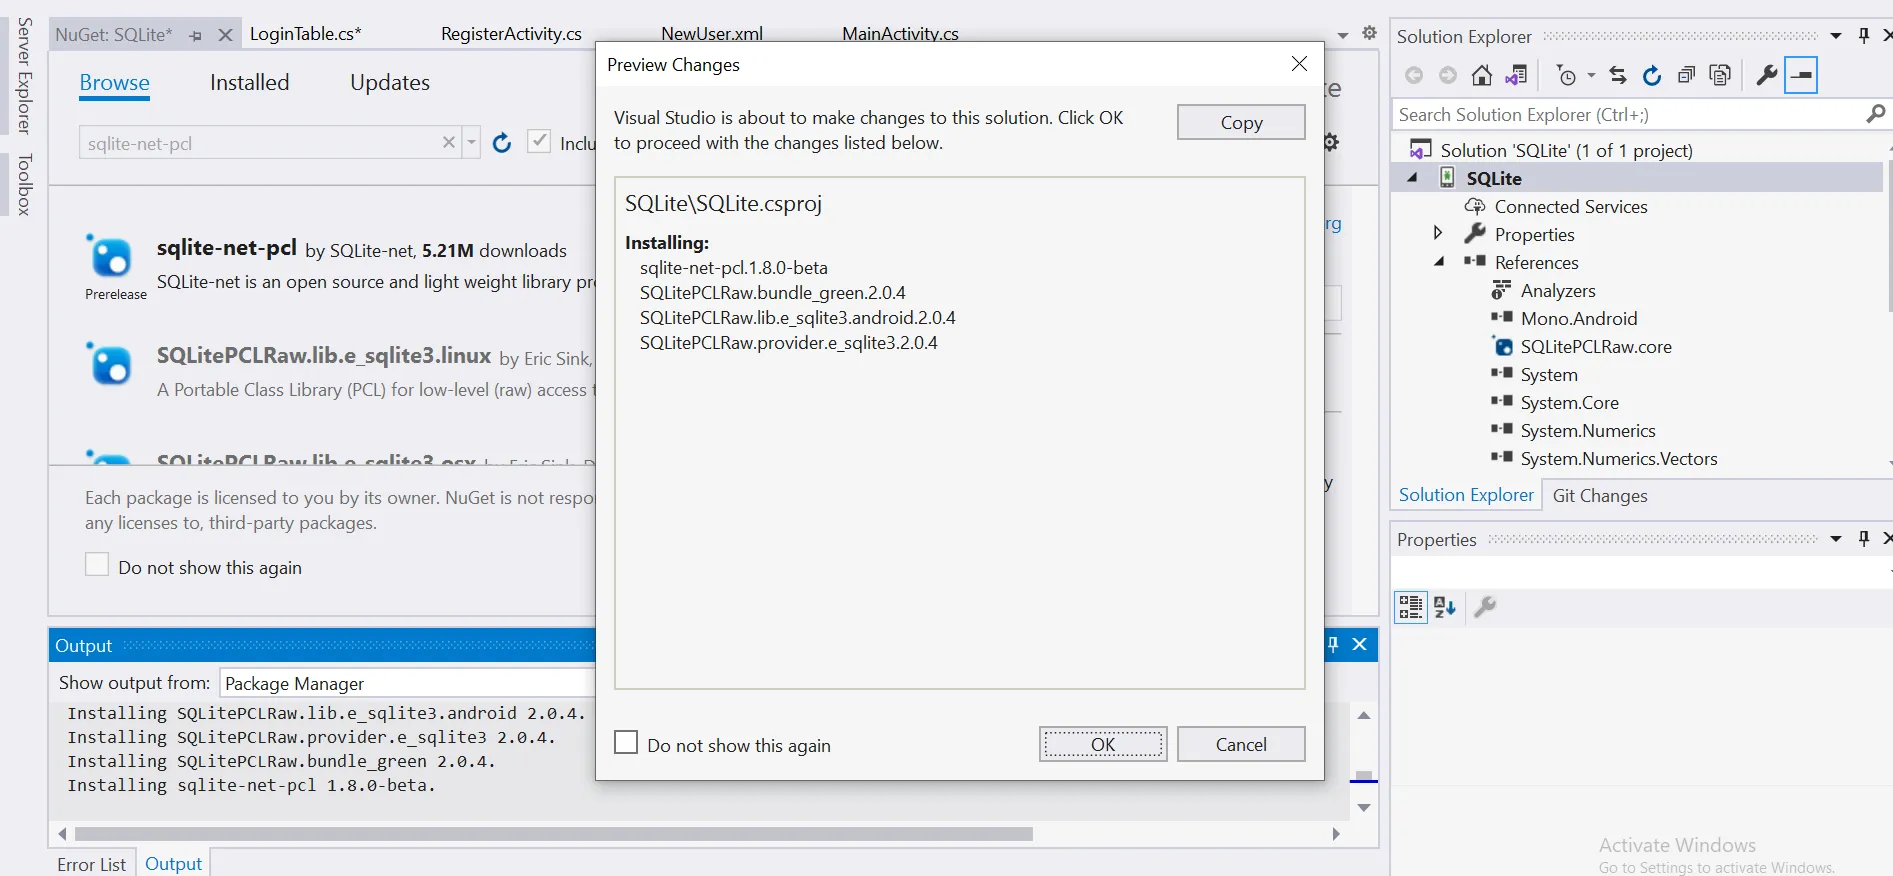 Install NuGet package